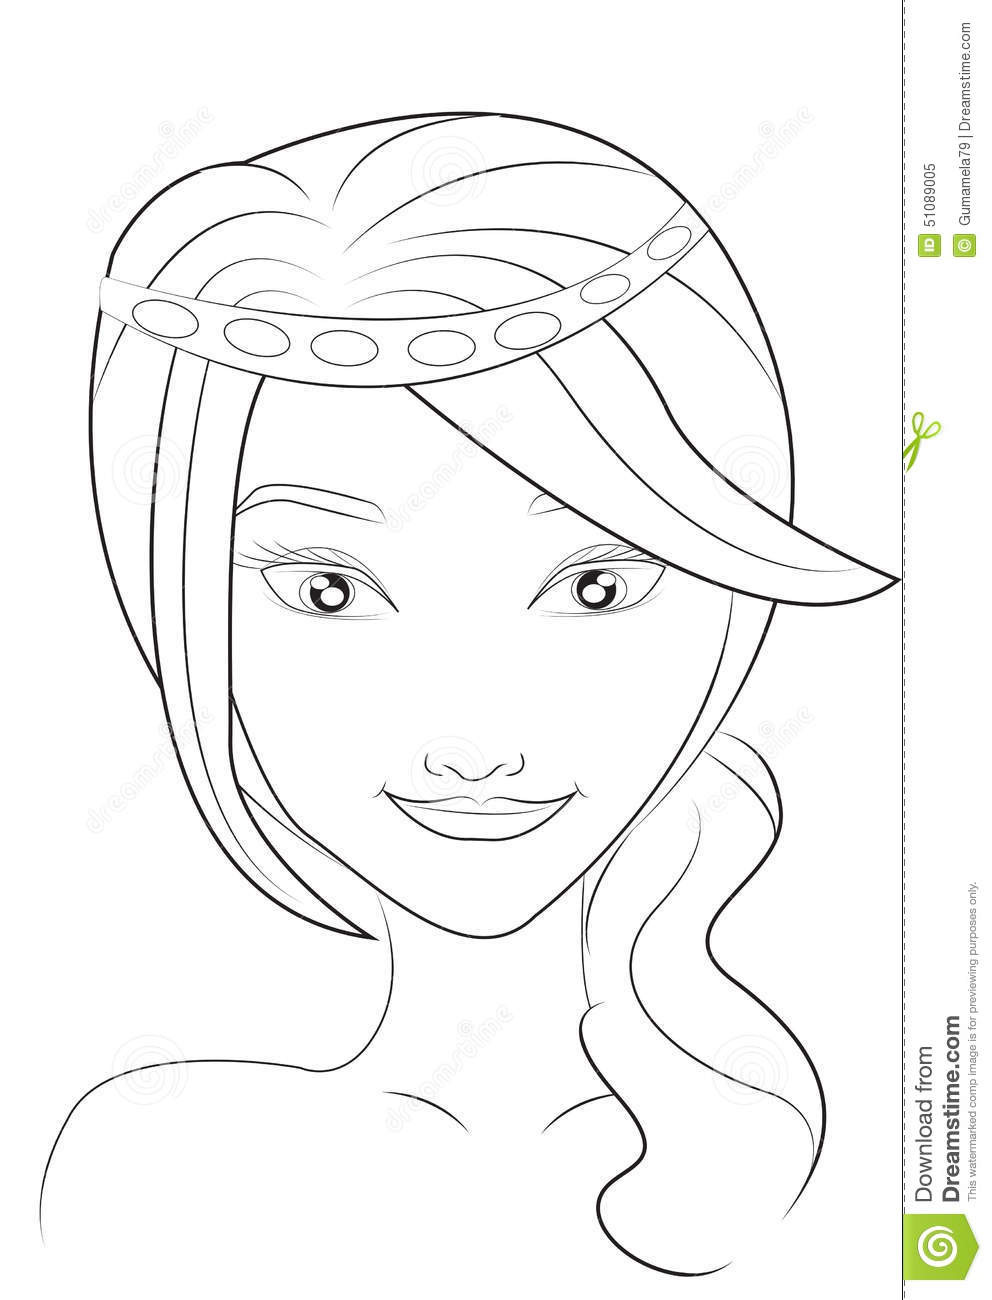 Girl Face Coloring Pages
 Girl s Face Coloring Page Stock Illustration Image